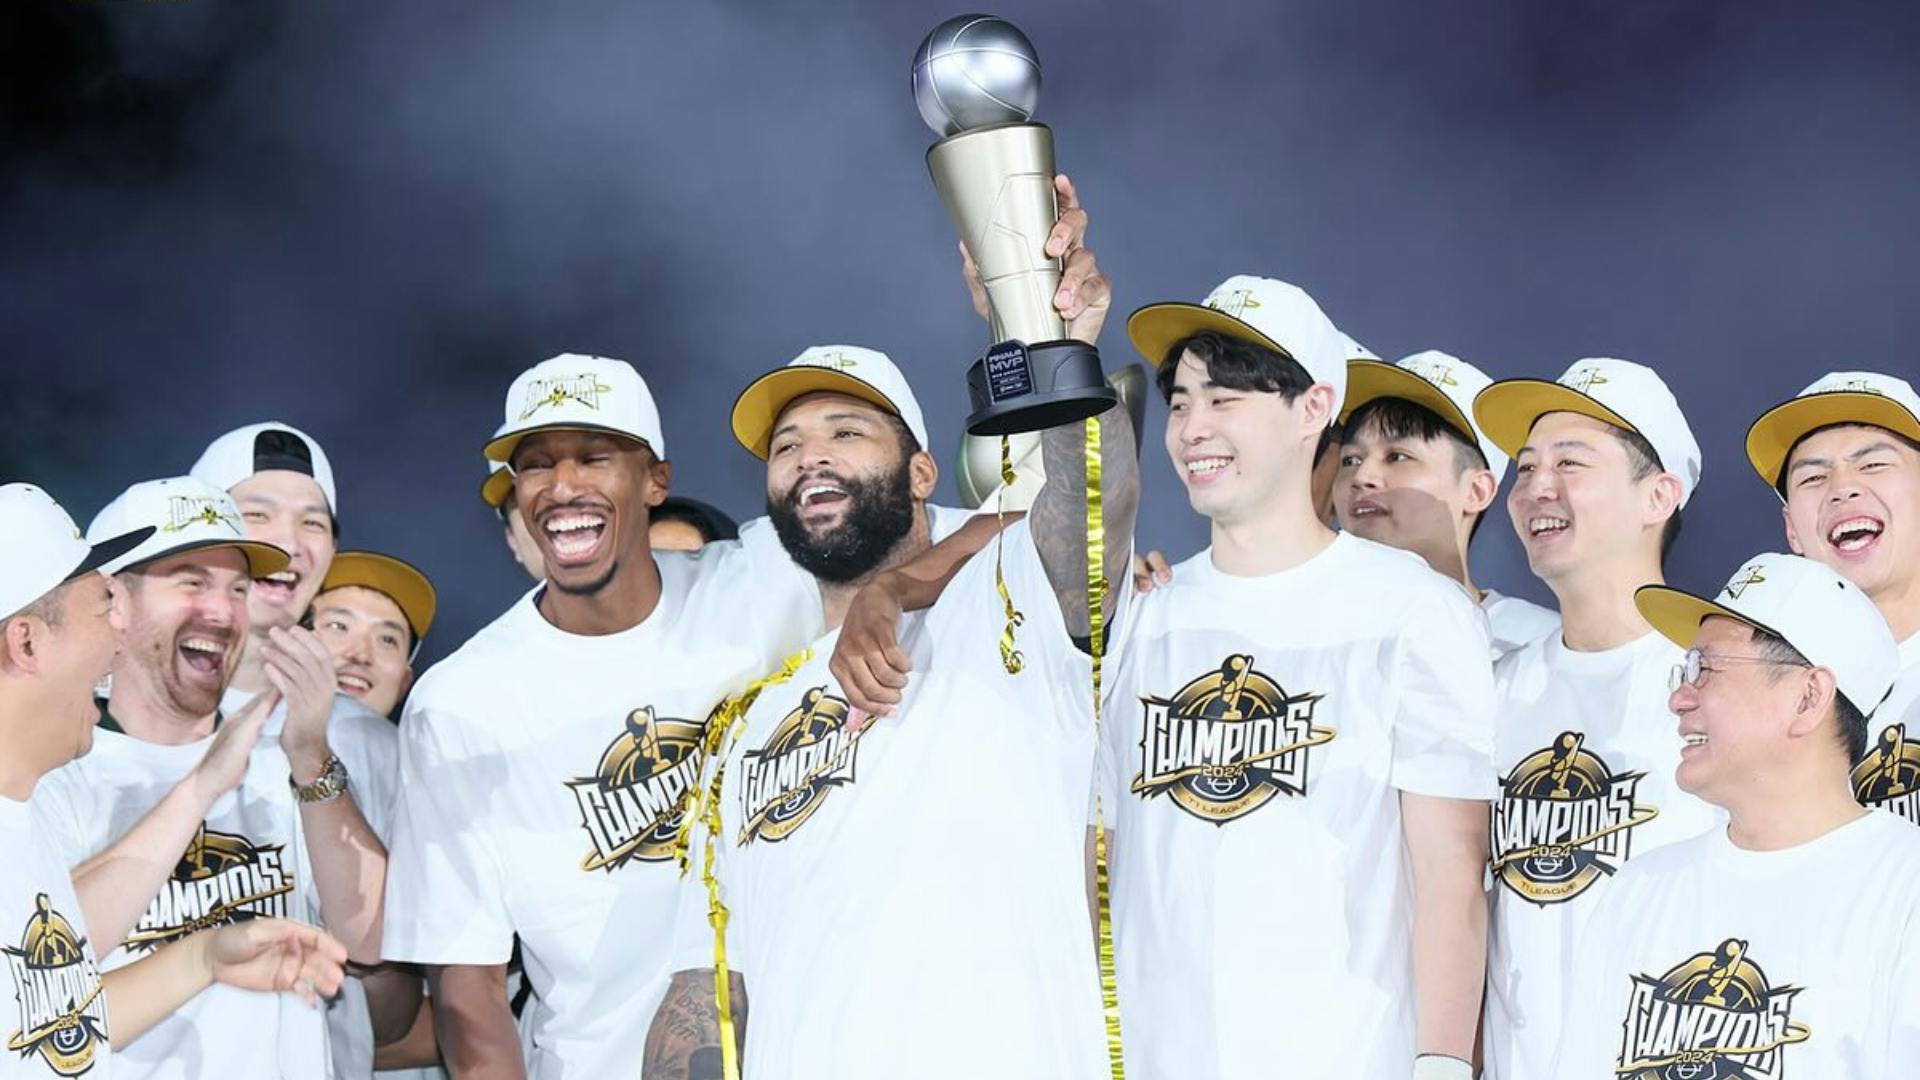 DeMarcus Cousins is T1 Finals MVP after title win with Taiwan Beer Leopards